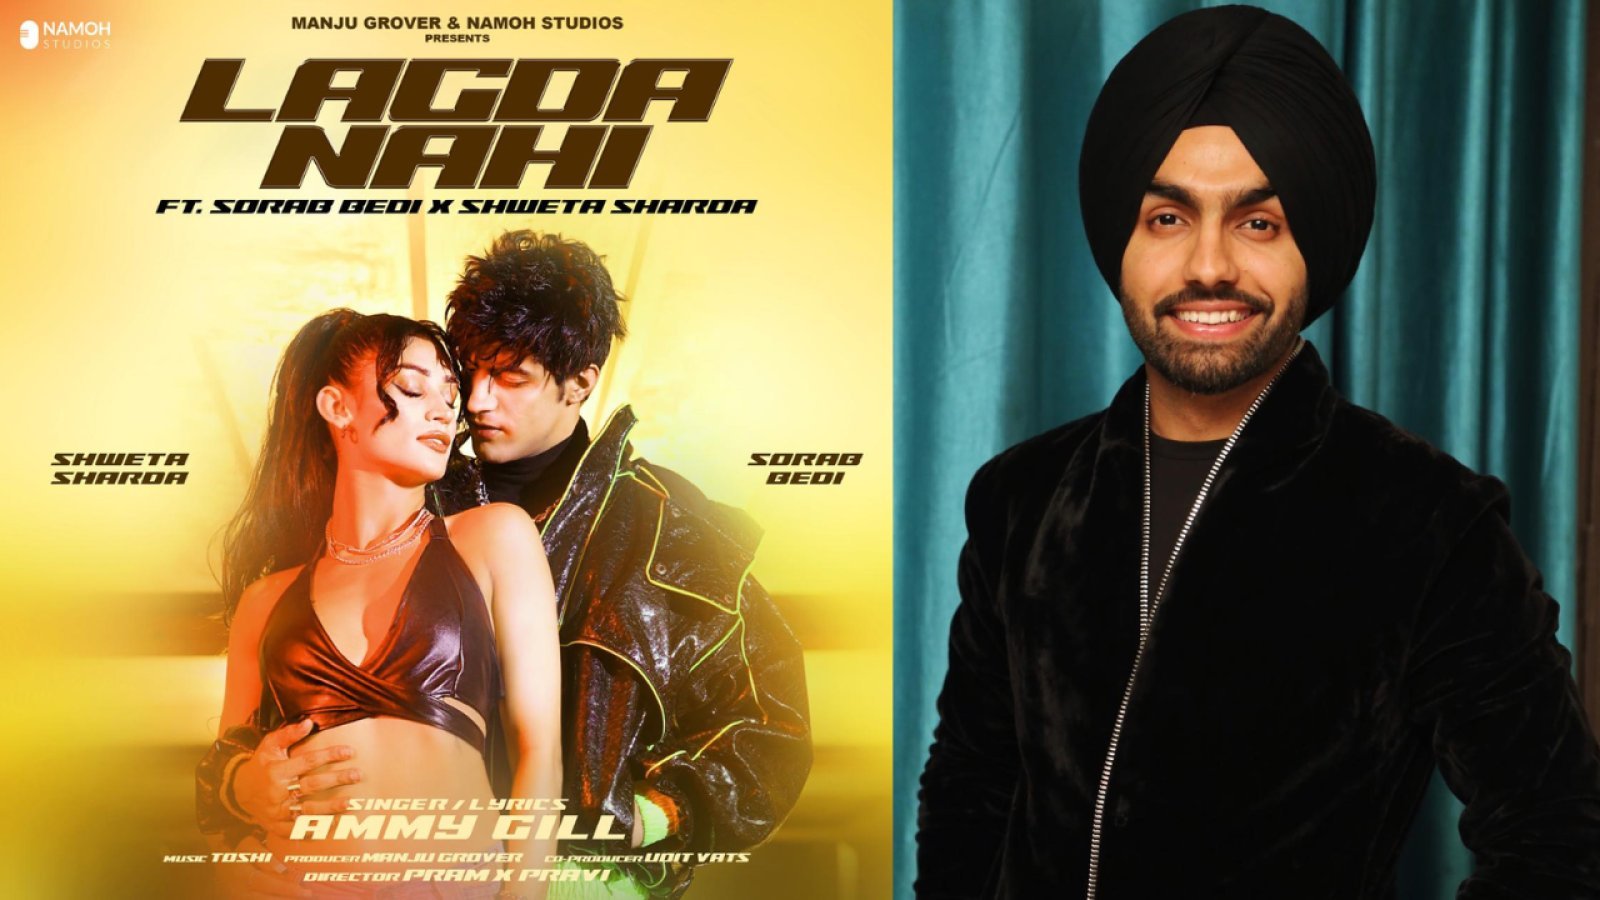 Tv Actor Sorab Bedi Drops Poster Of His New Music Video Lagda Nahi Sung By Ammy Virk Featuring Miss Universe India Shweta Shardha